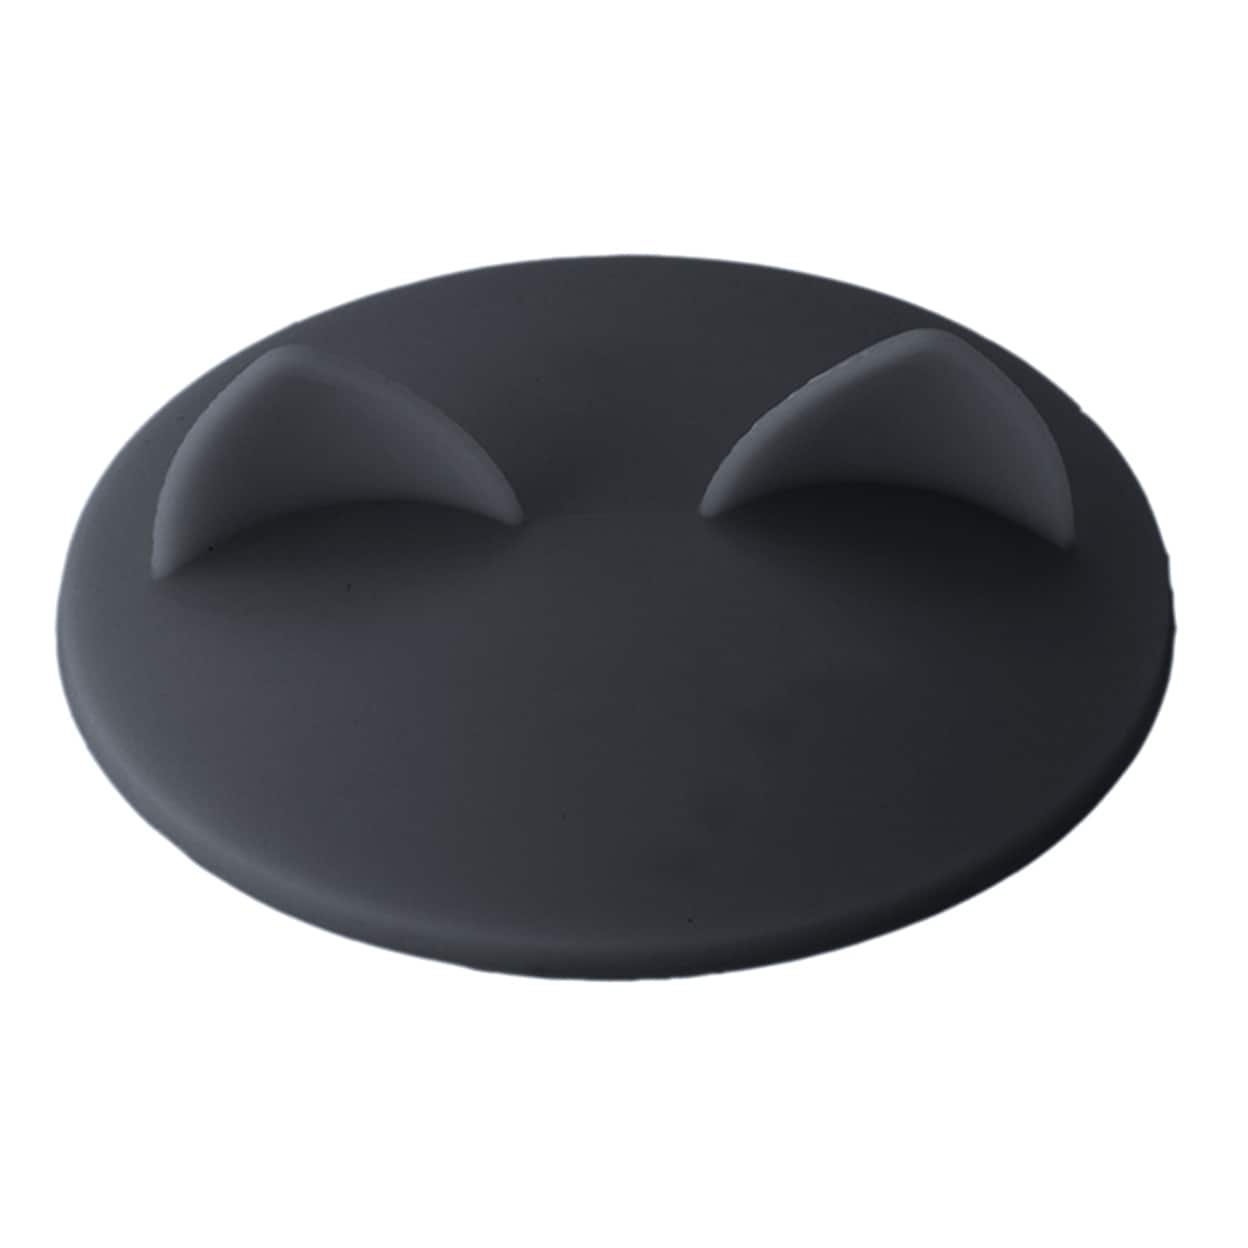 Cat Ear Silicone Cup Cover